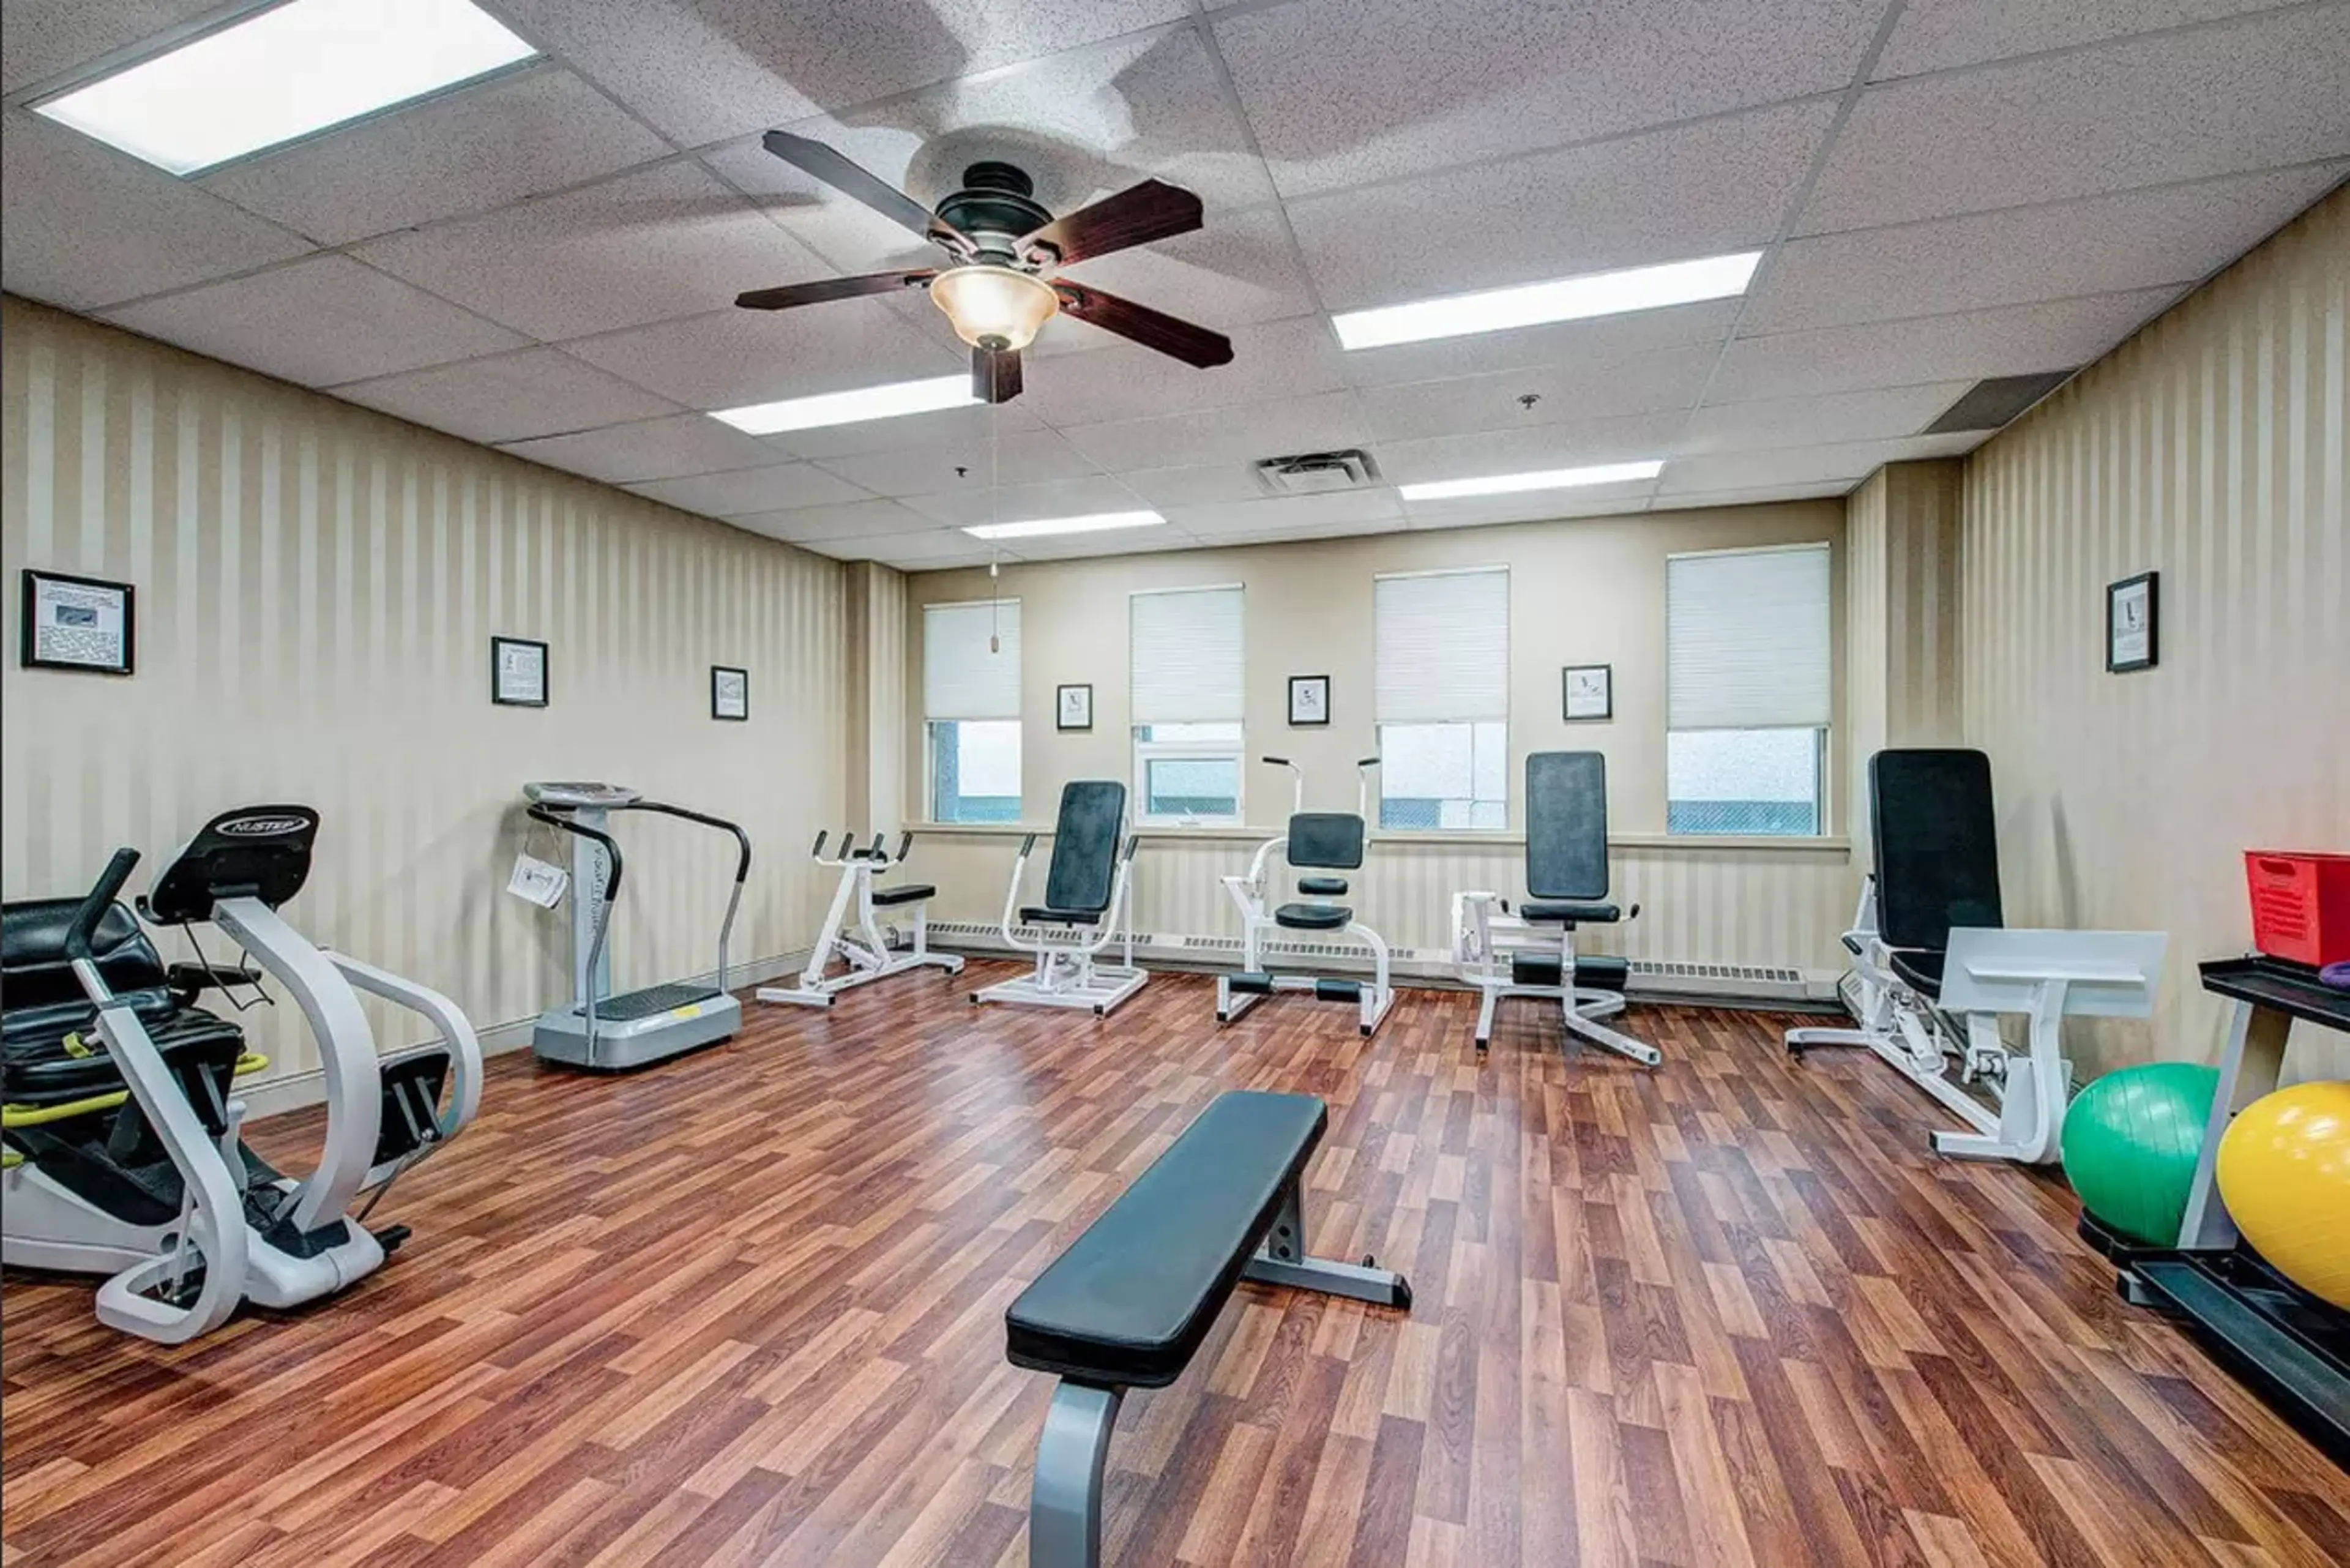 The Churchill Gallery Fitness Room